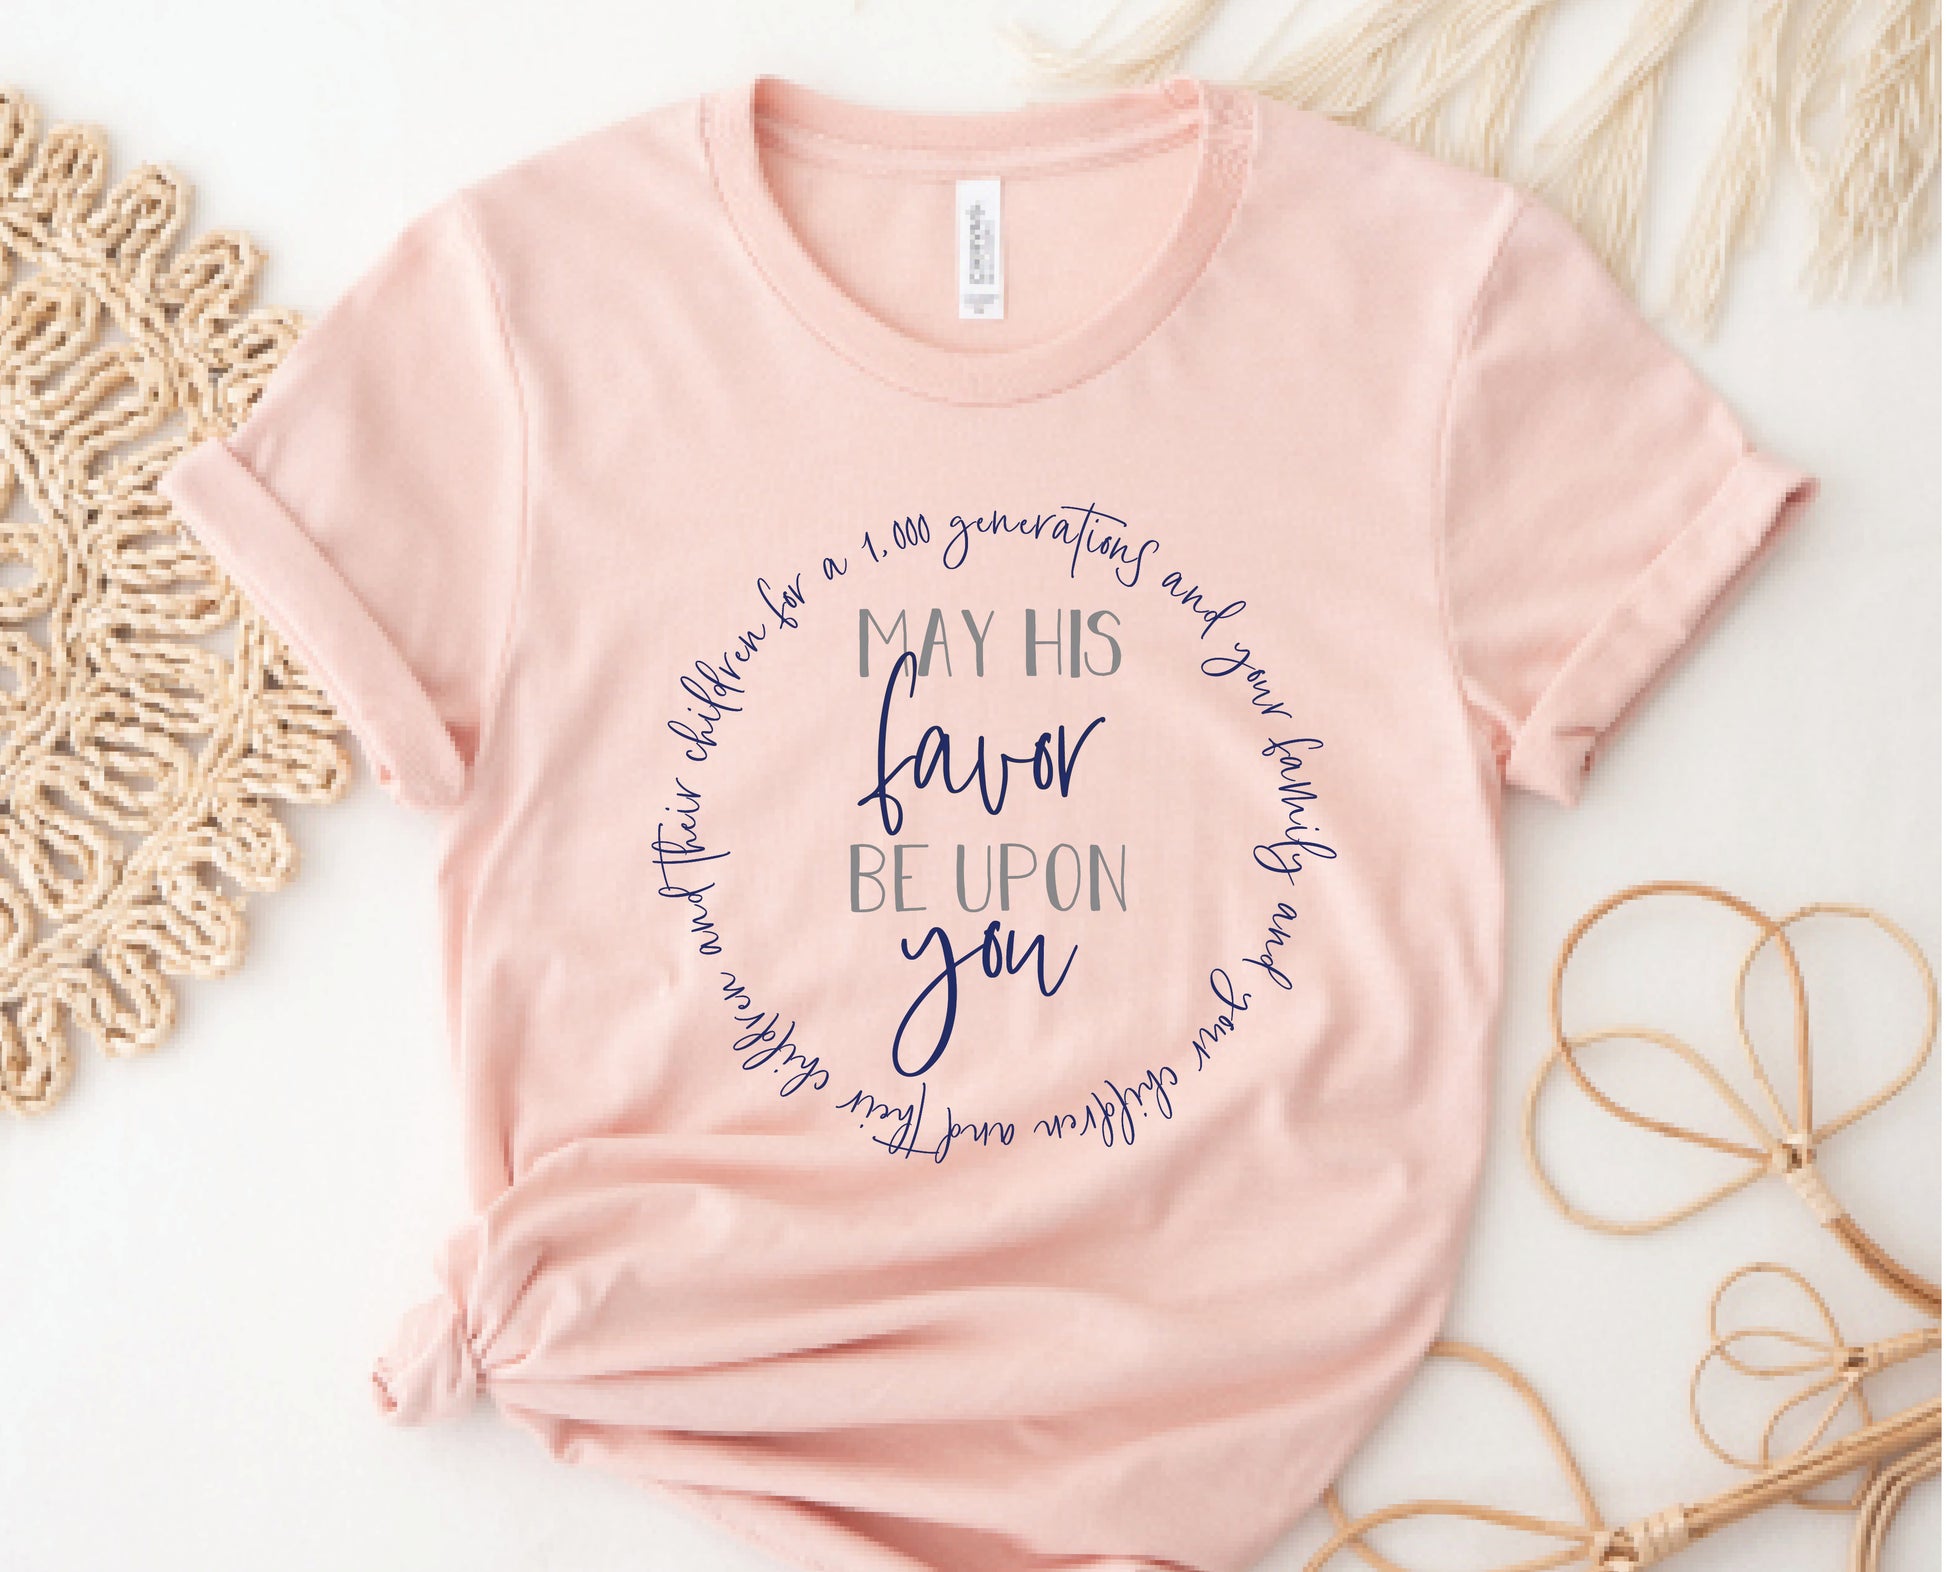 May His Favor Be Upon family & children Numbers 6 The Blessing Christian aesthetic circle design printed on soft heather prism peach t-shirt for women